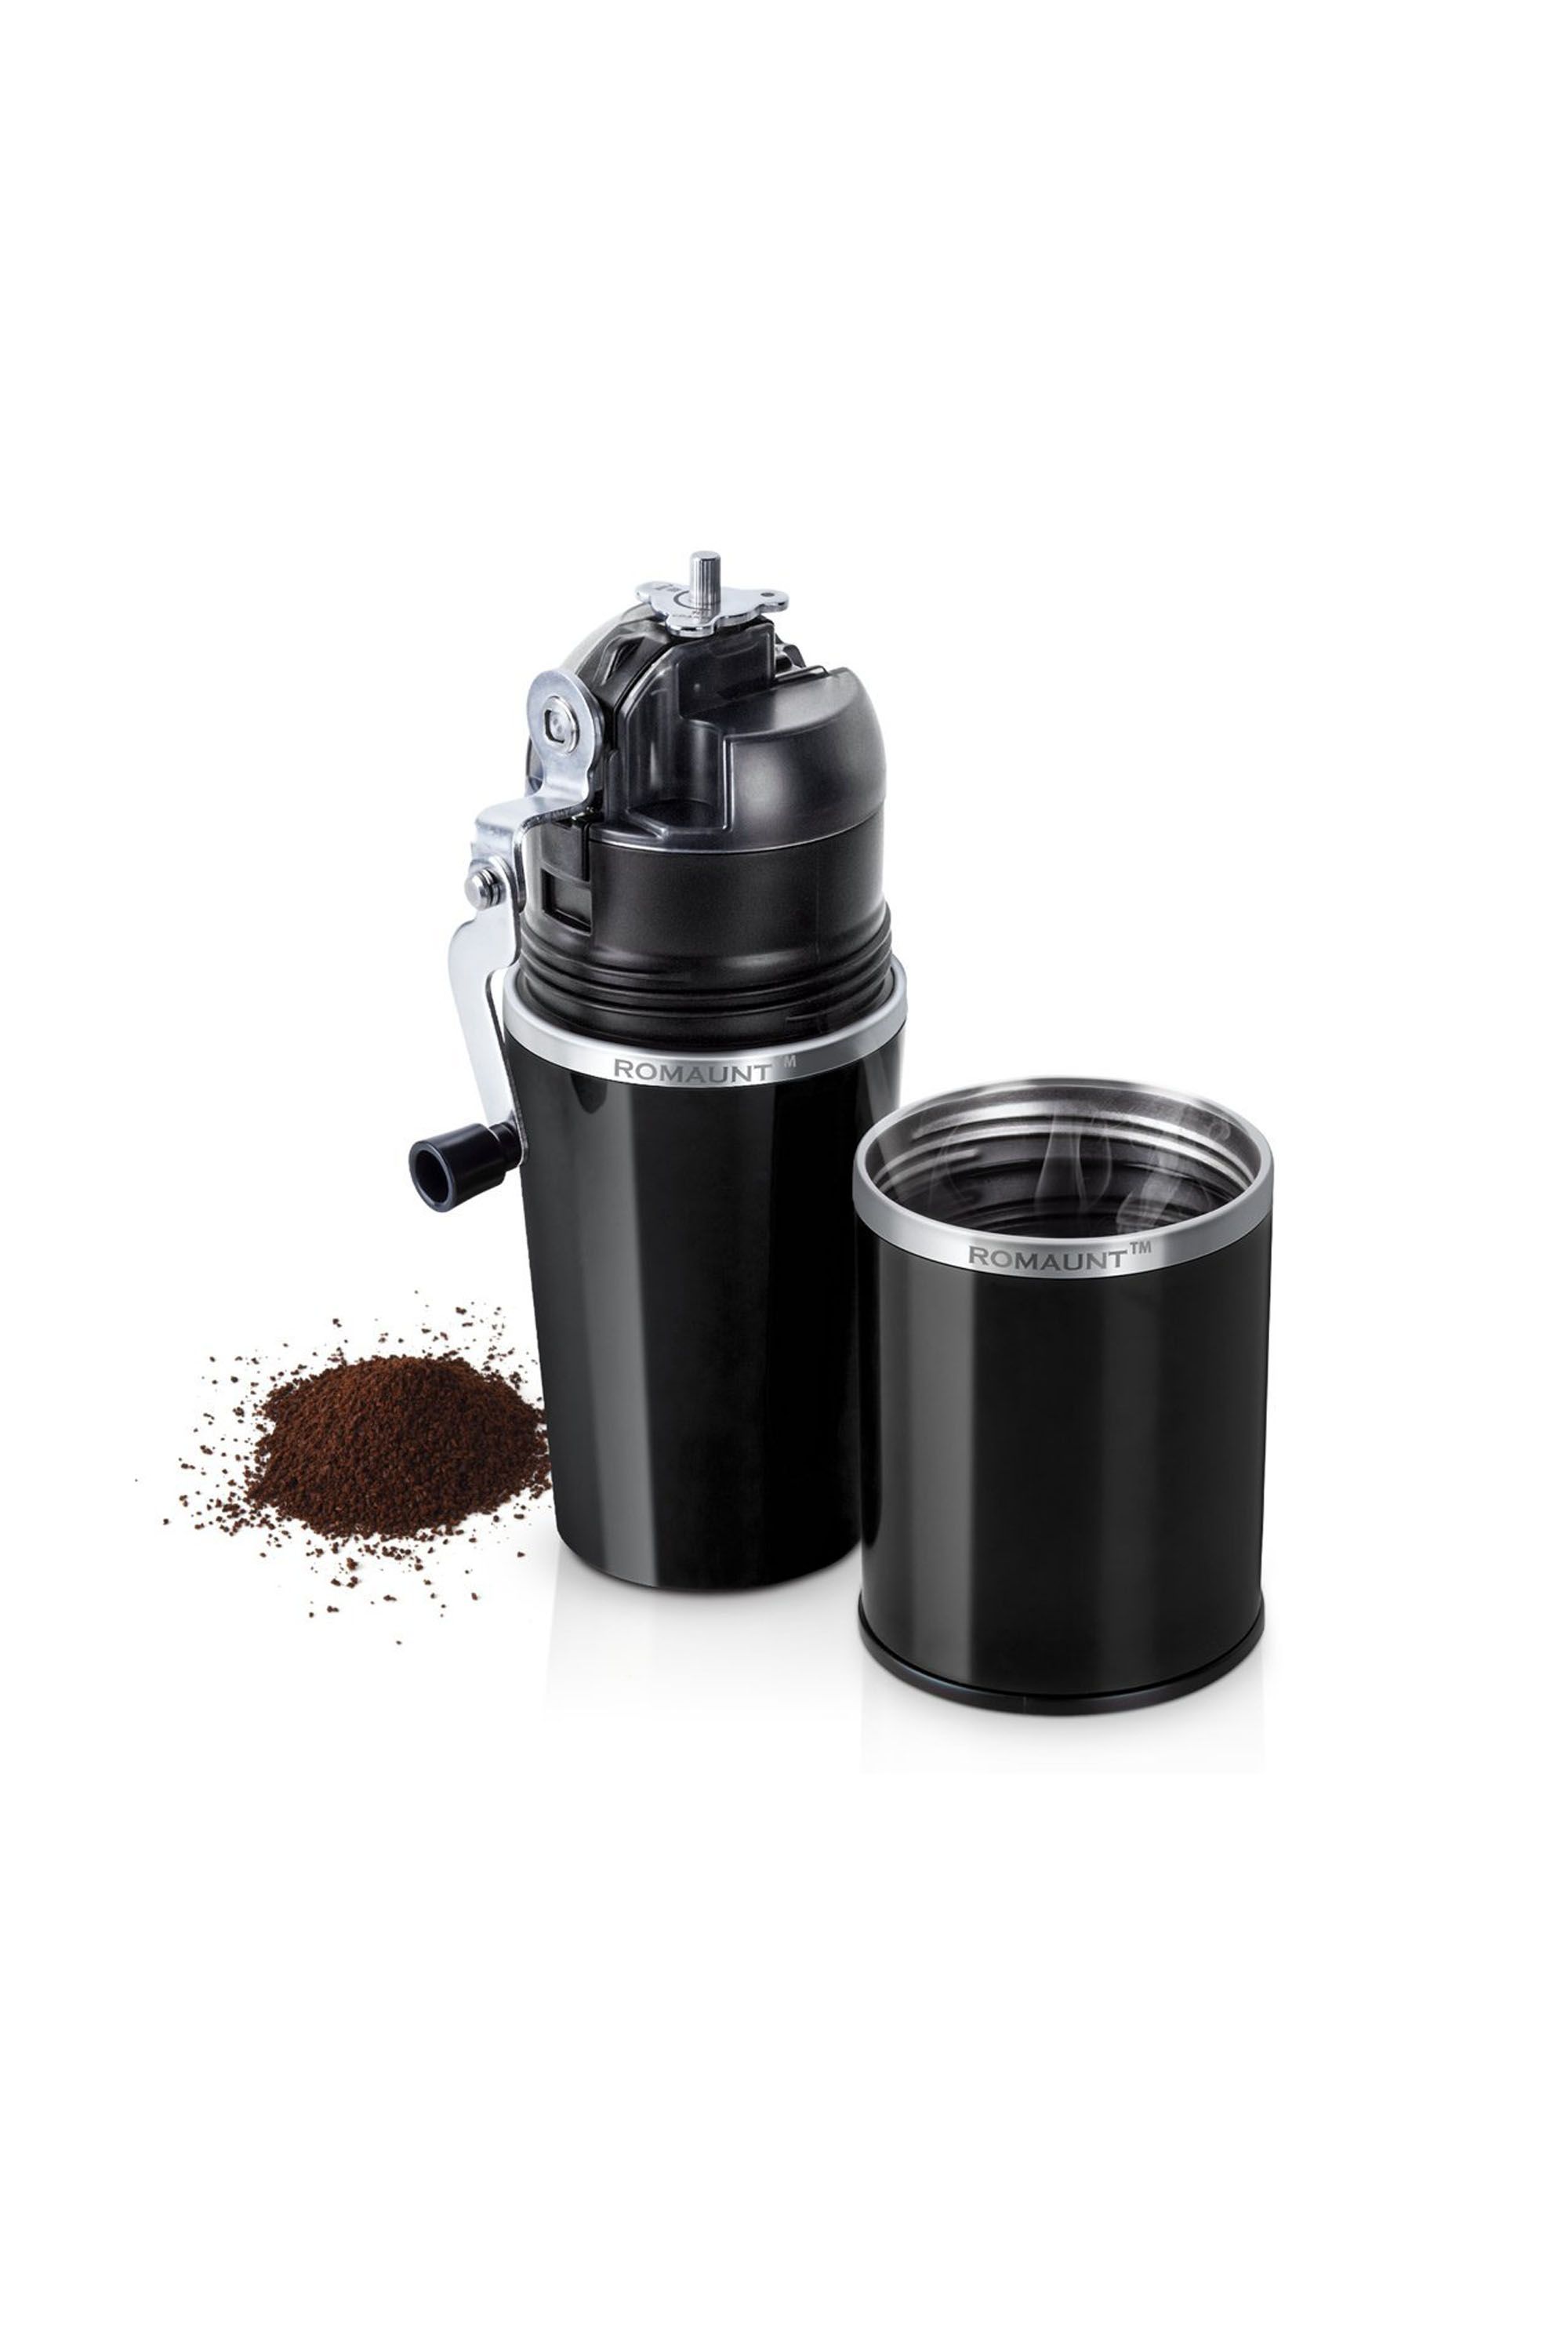 15 Best Camping Coffee Makers - Top Portable Coffee Makers for